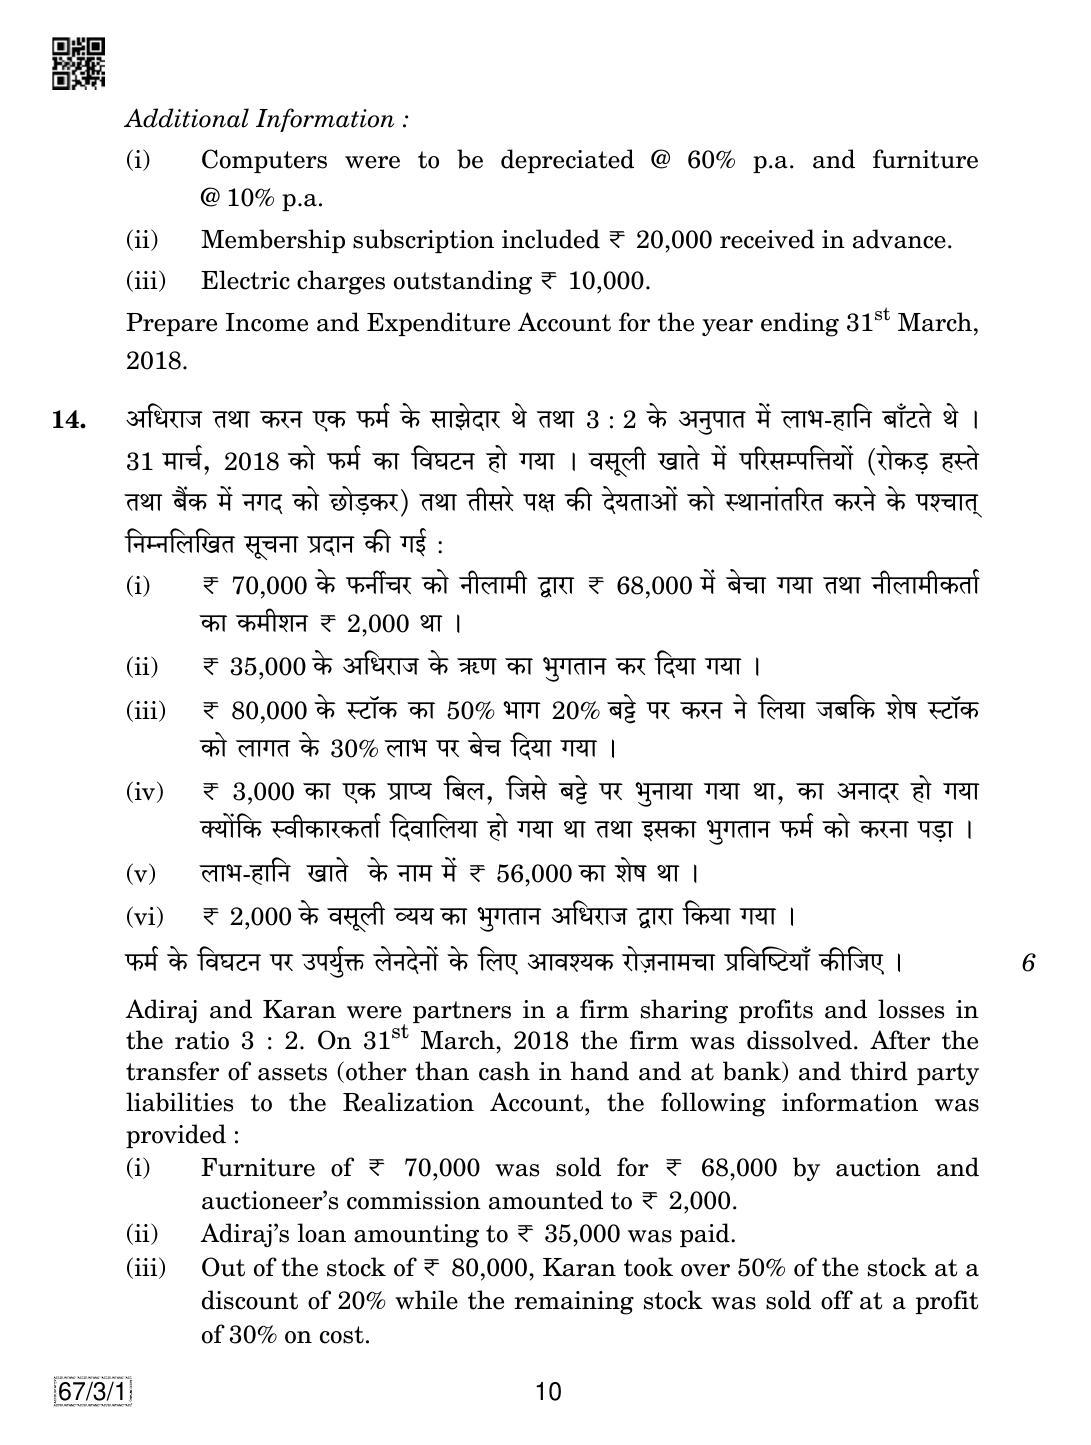 CBSE Class 12 67-3-1 Accountancy 2019 Question Paper - Page 10